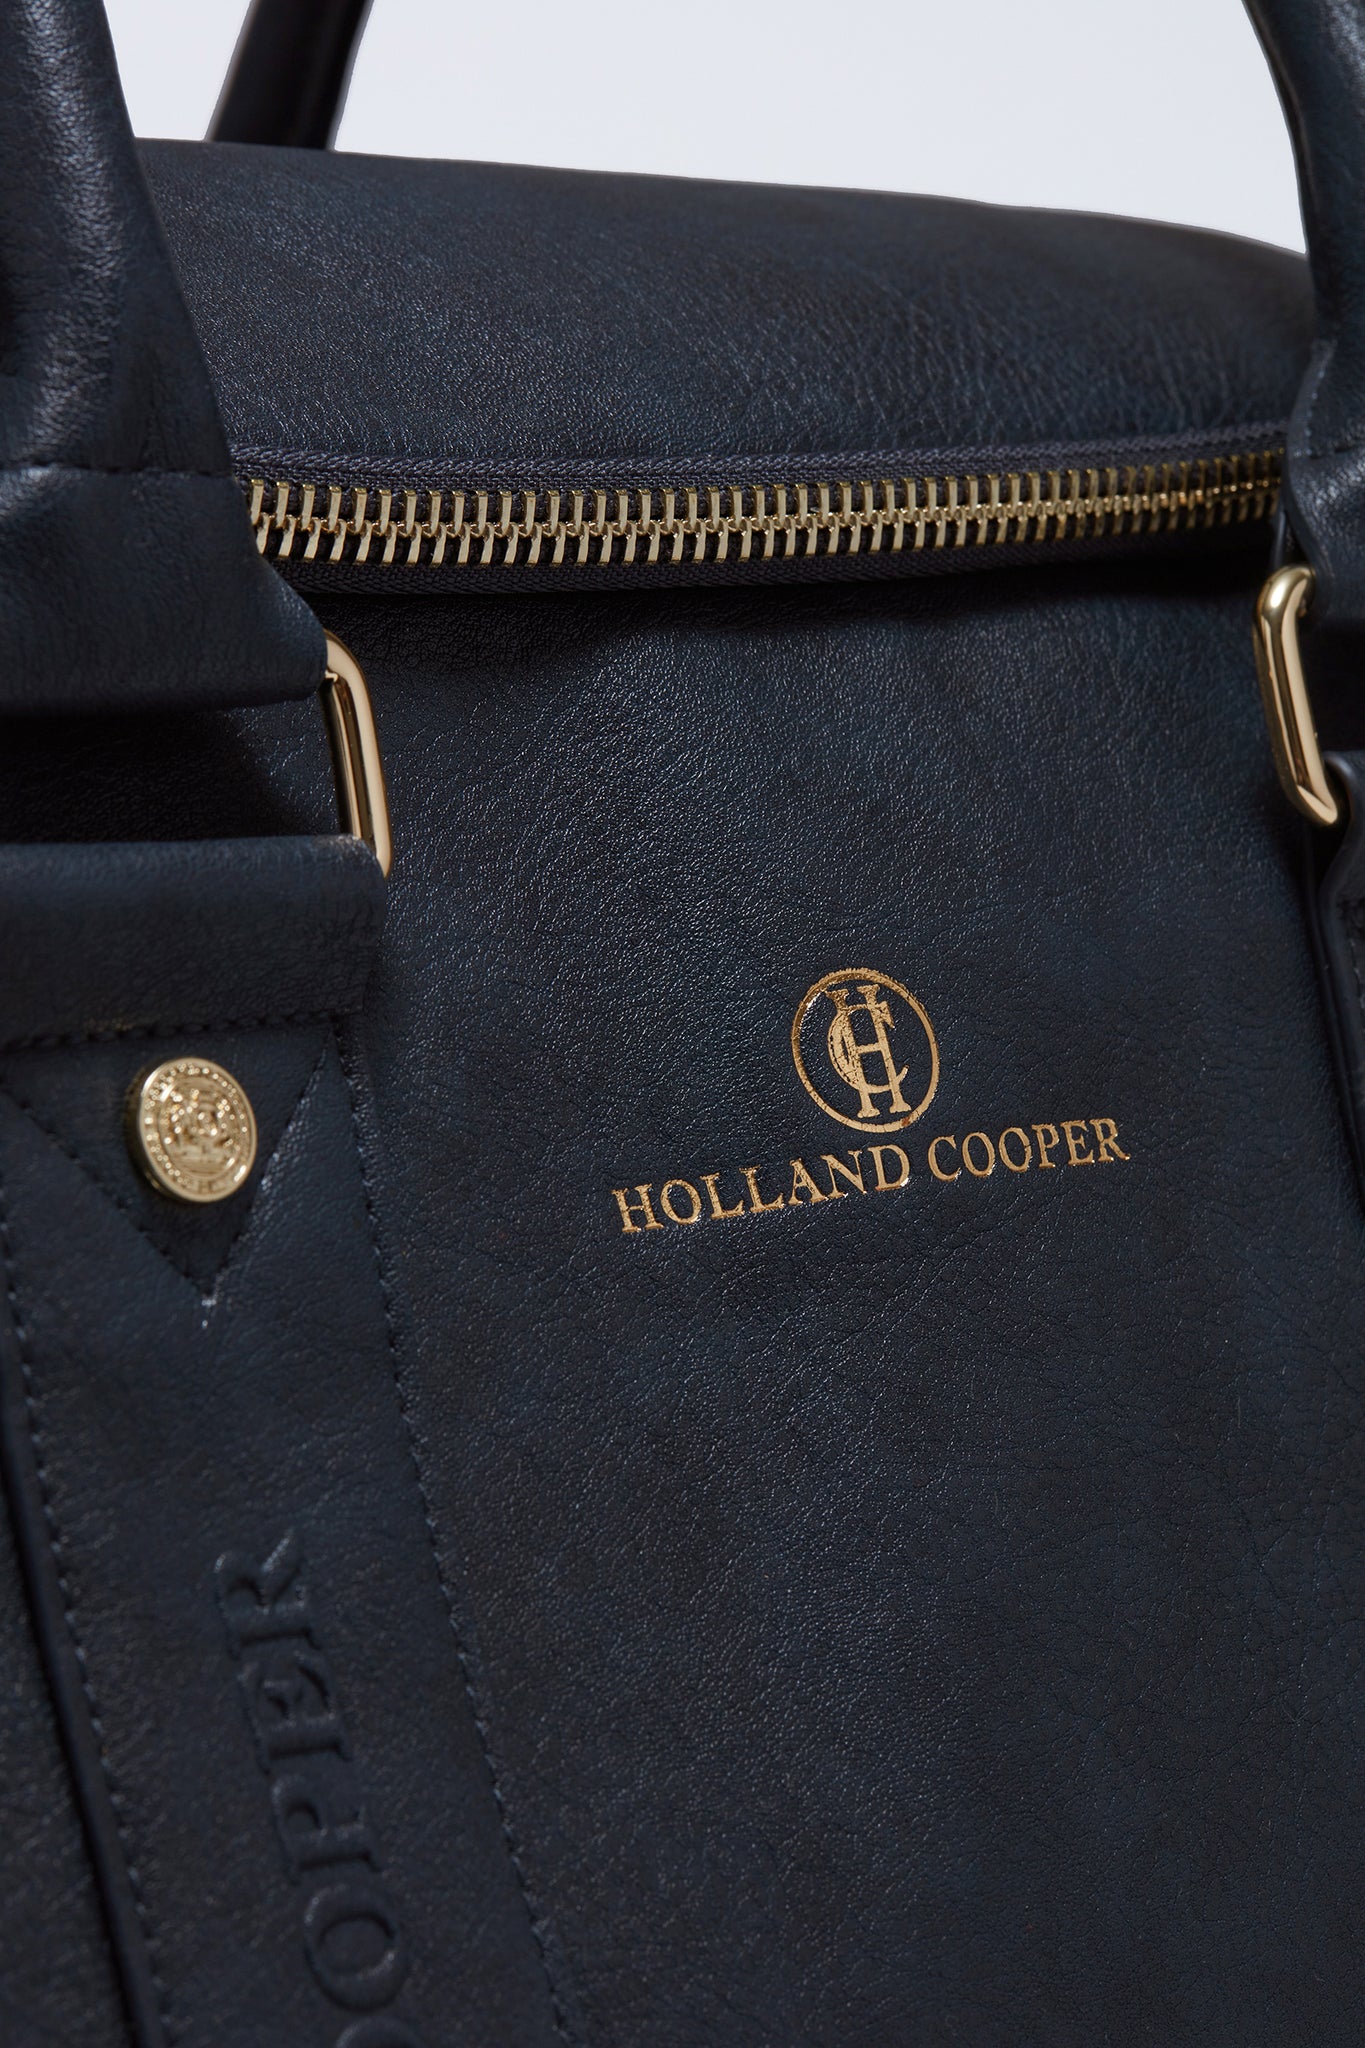 close up of gold embossed brand logo and zip on navy faux leather equestrian kit bag